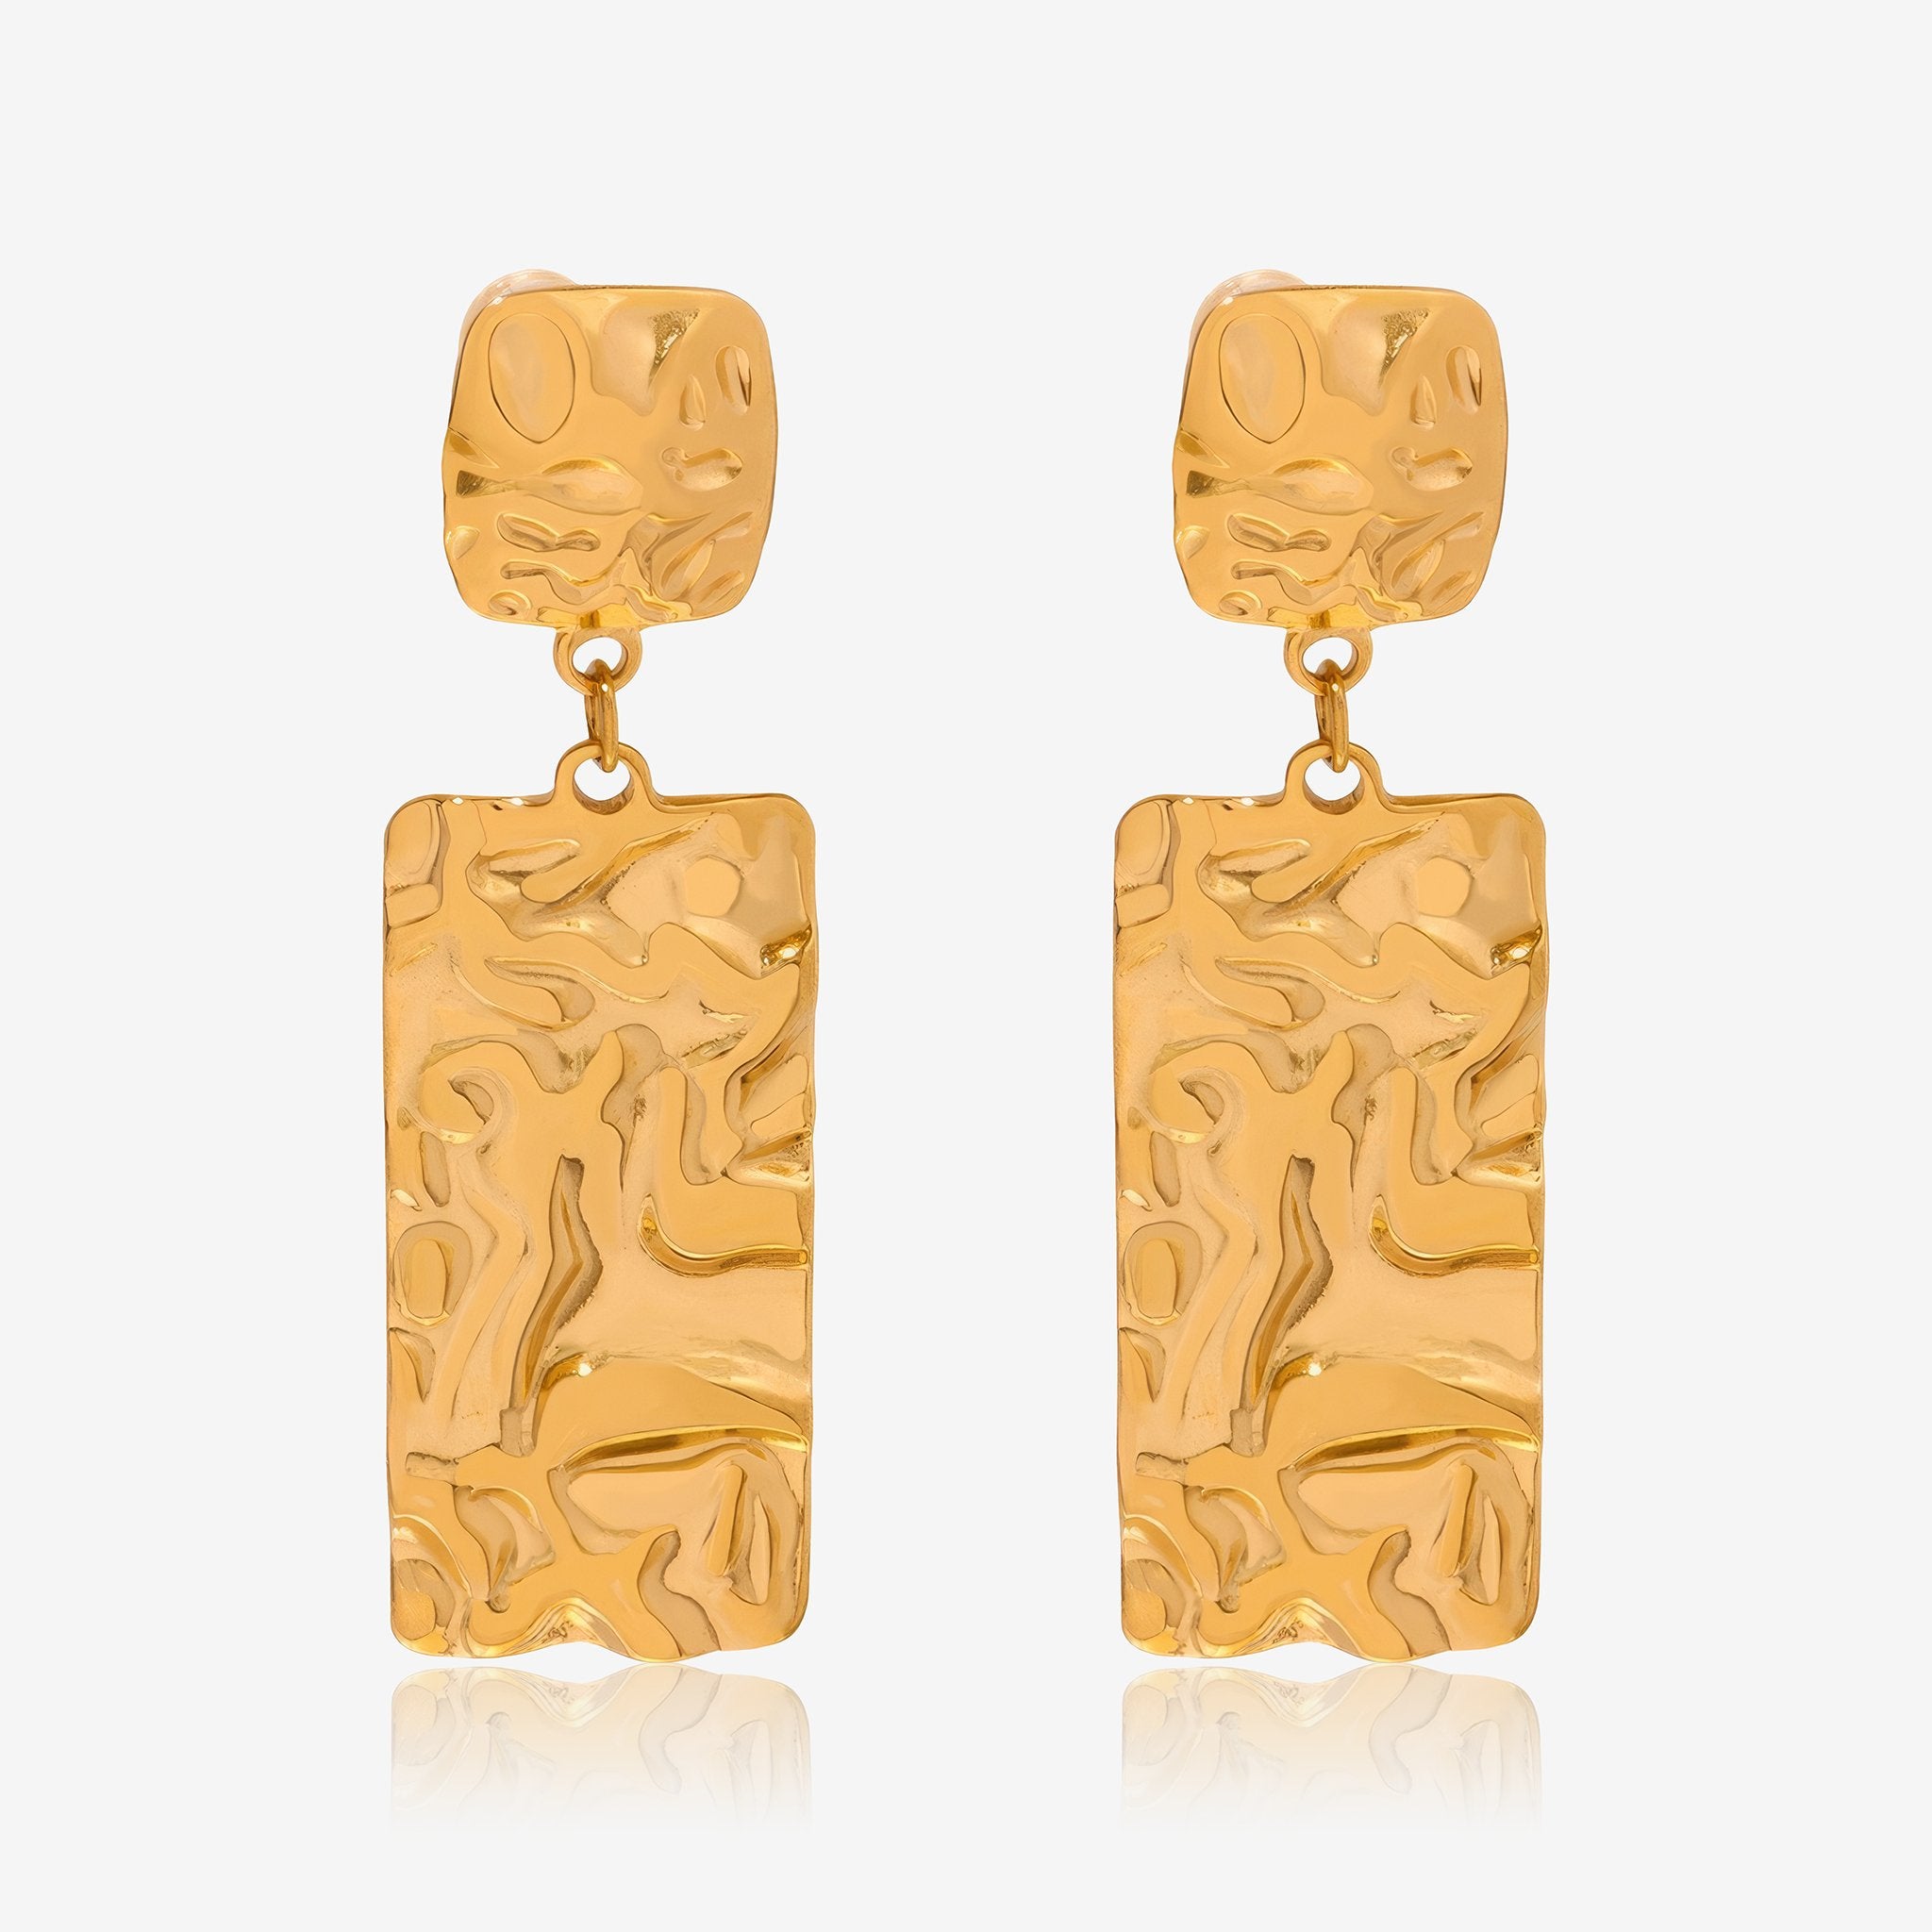 Sigrid Gold Wrinkle Earrings - Nobbier - Earrings - 18K Gold And Titanium PVD Coated Jewelry